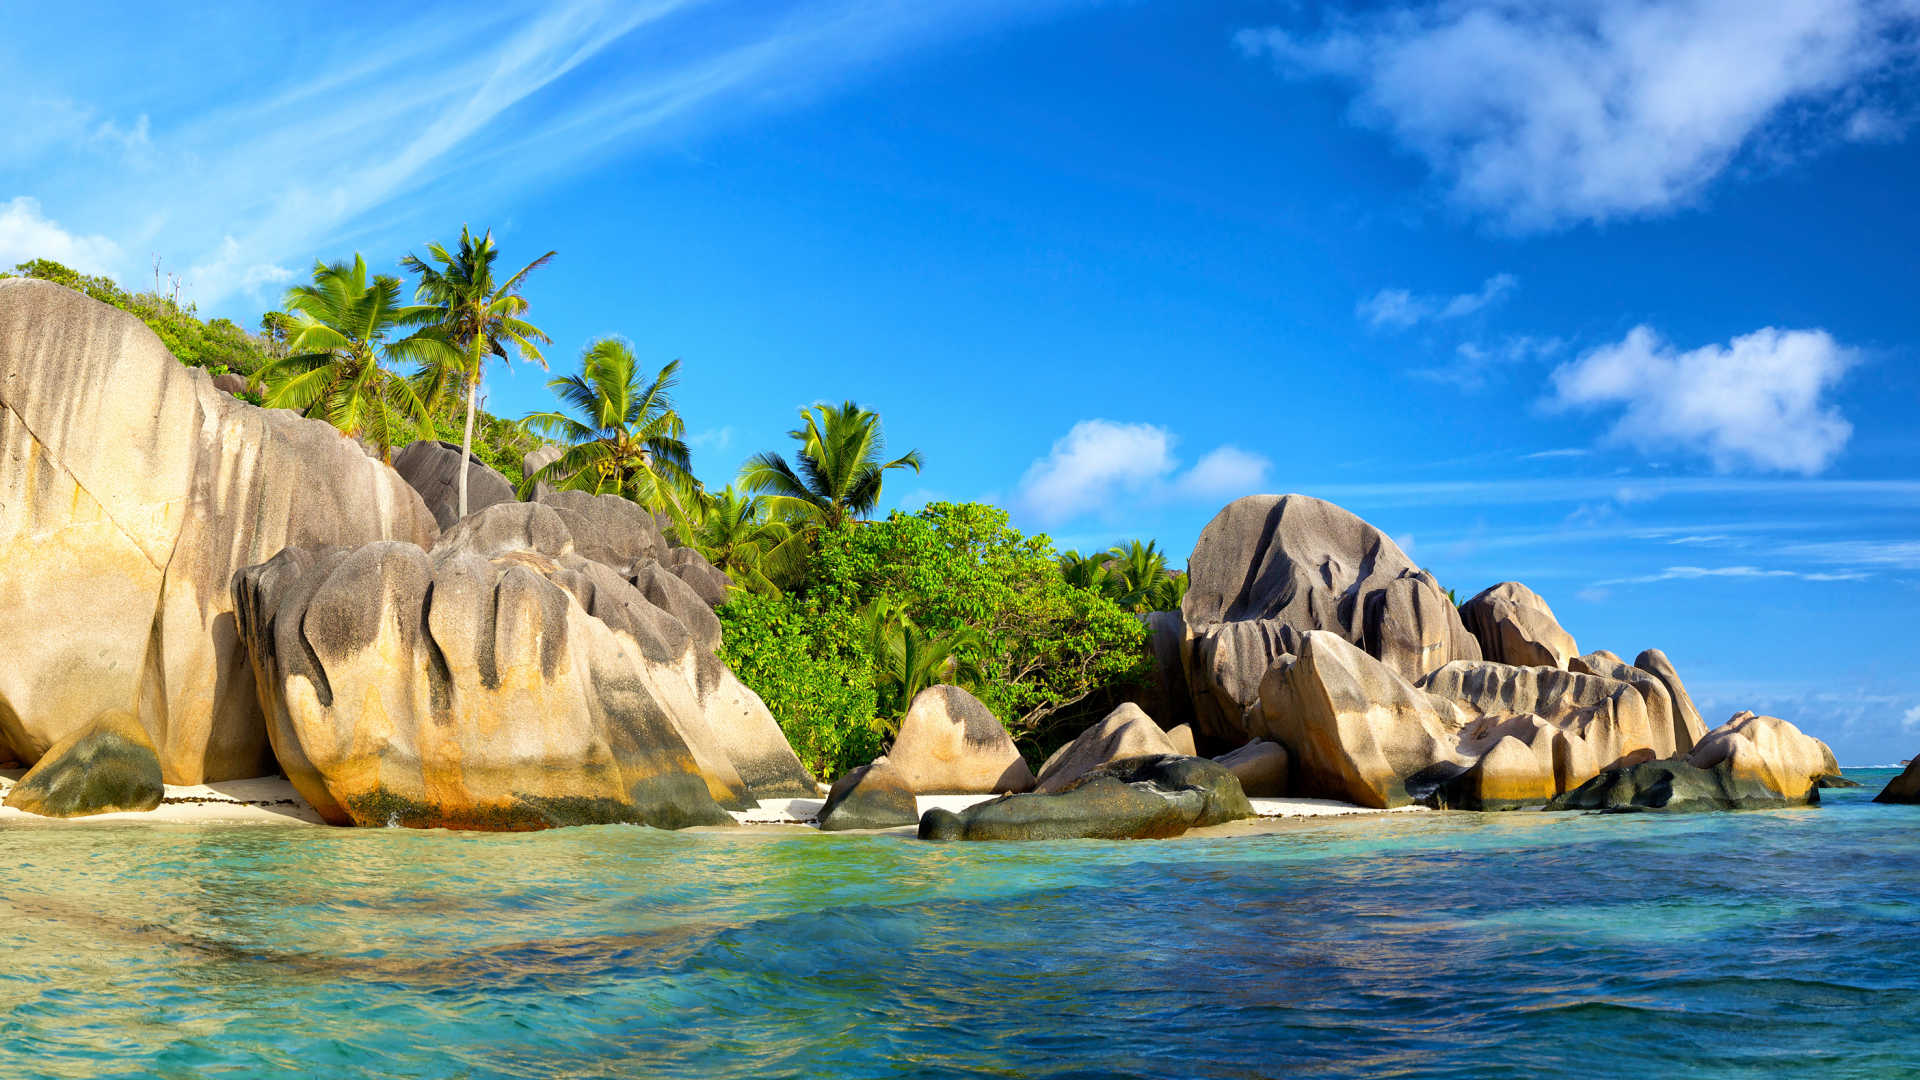 Seychelles Wallpapers High Quality Download Free